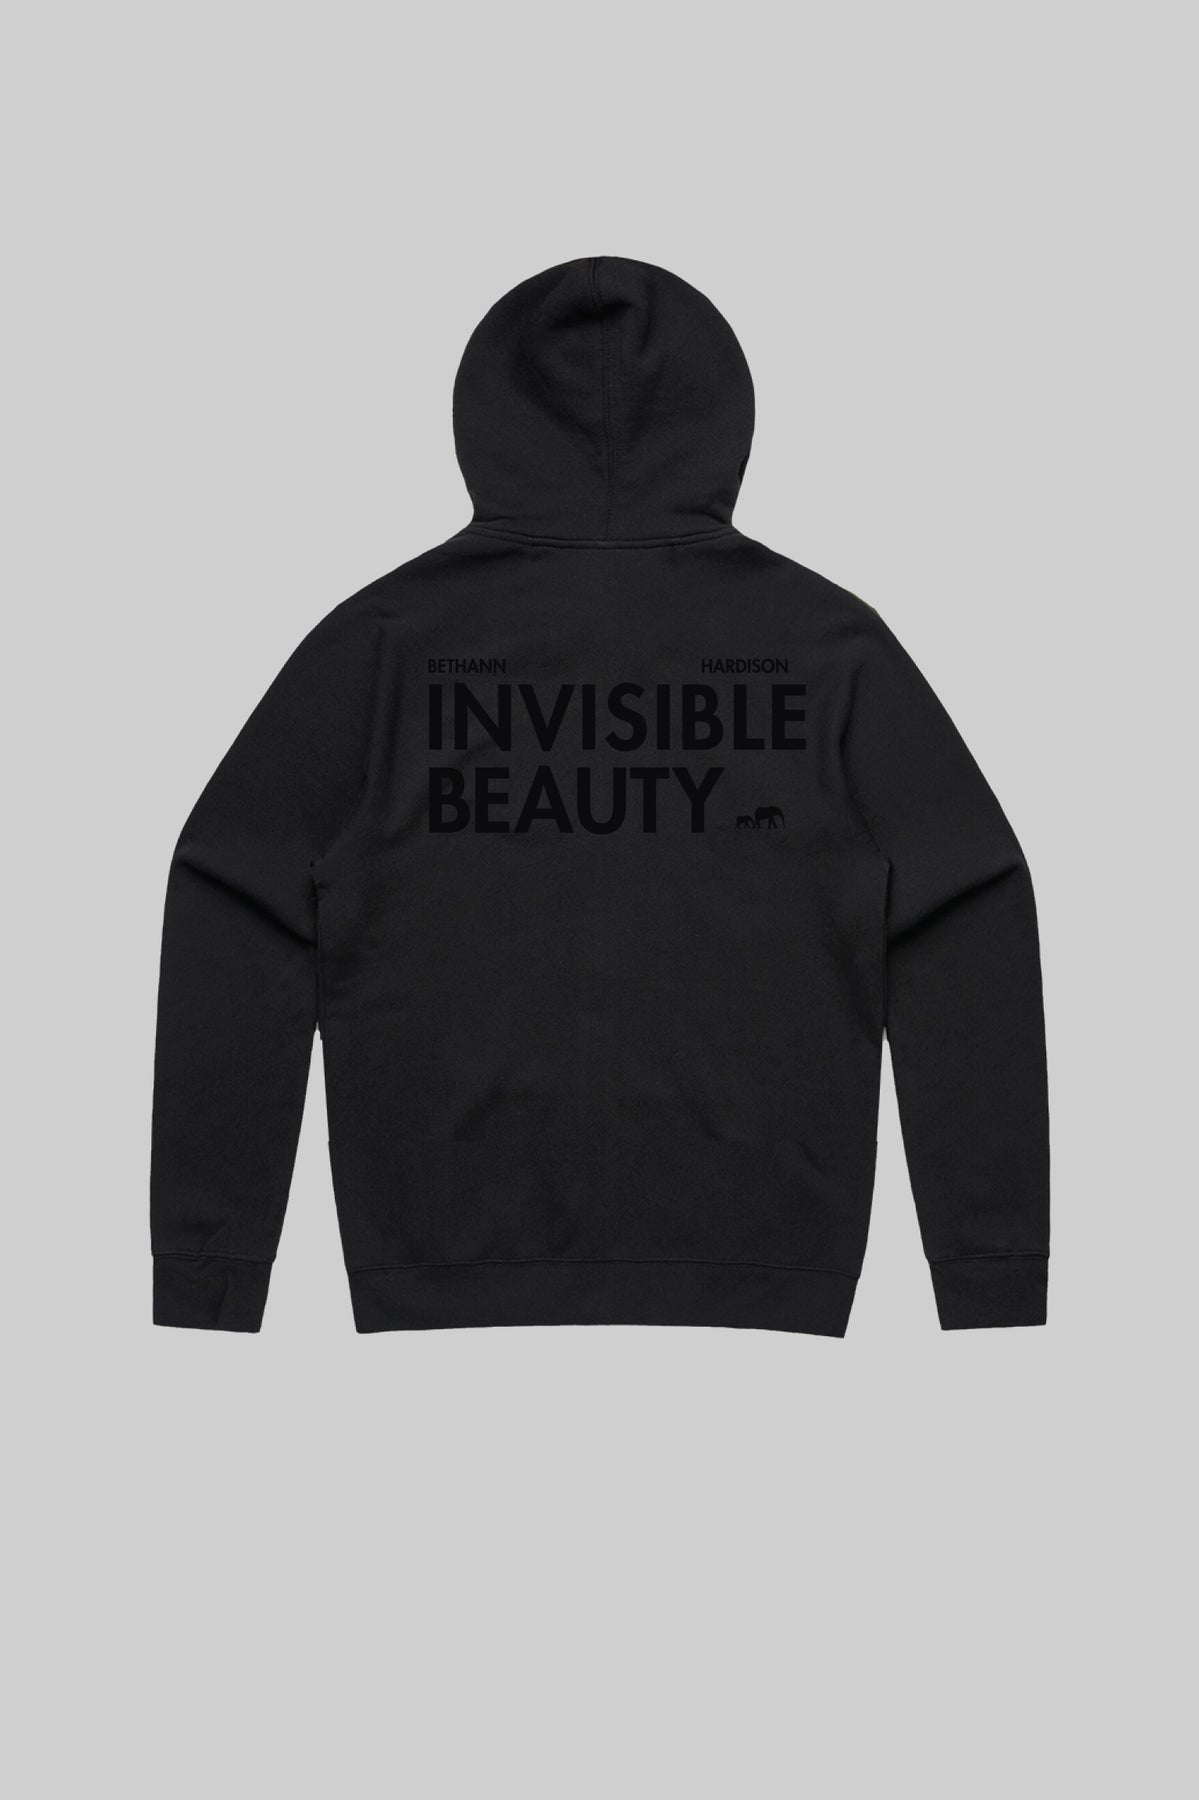 INVISIBLE BEAUTY x BKc Hoodie